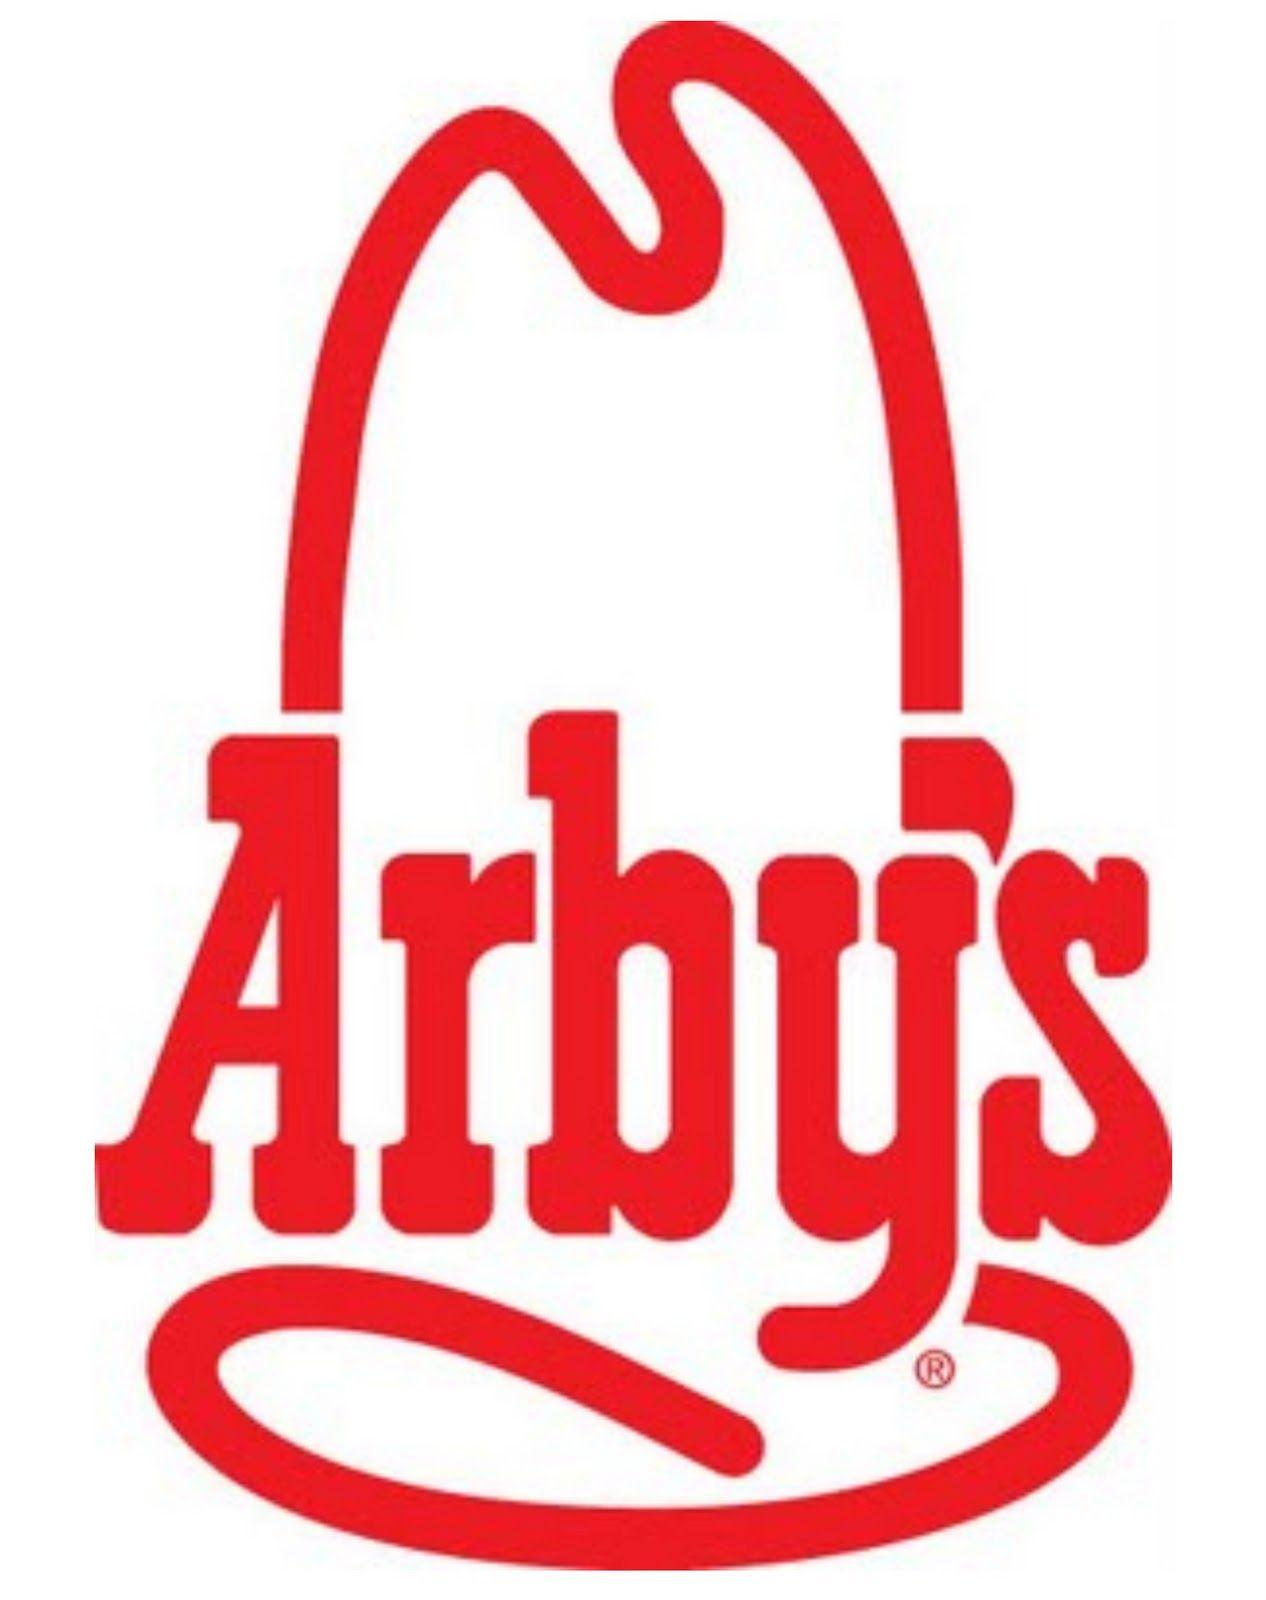 Inappropriate Logo - Subliminal Message Photos: Arby's Logo Subliminal Message